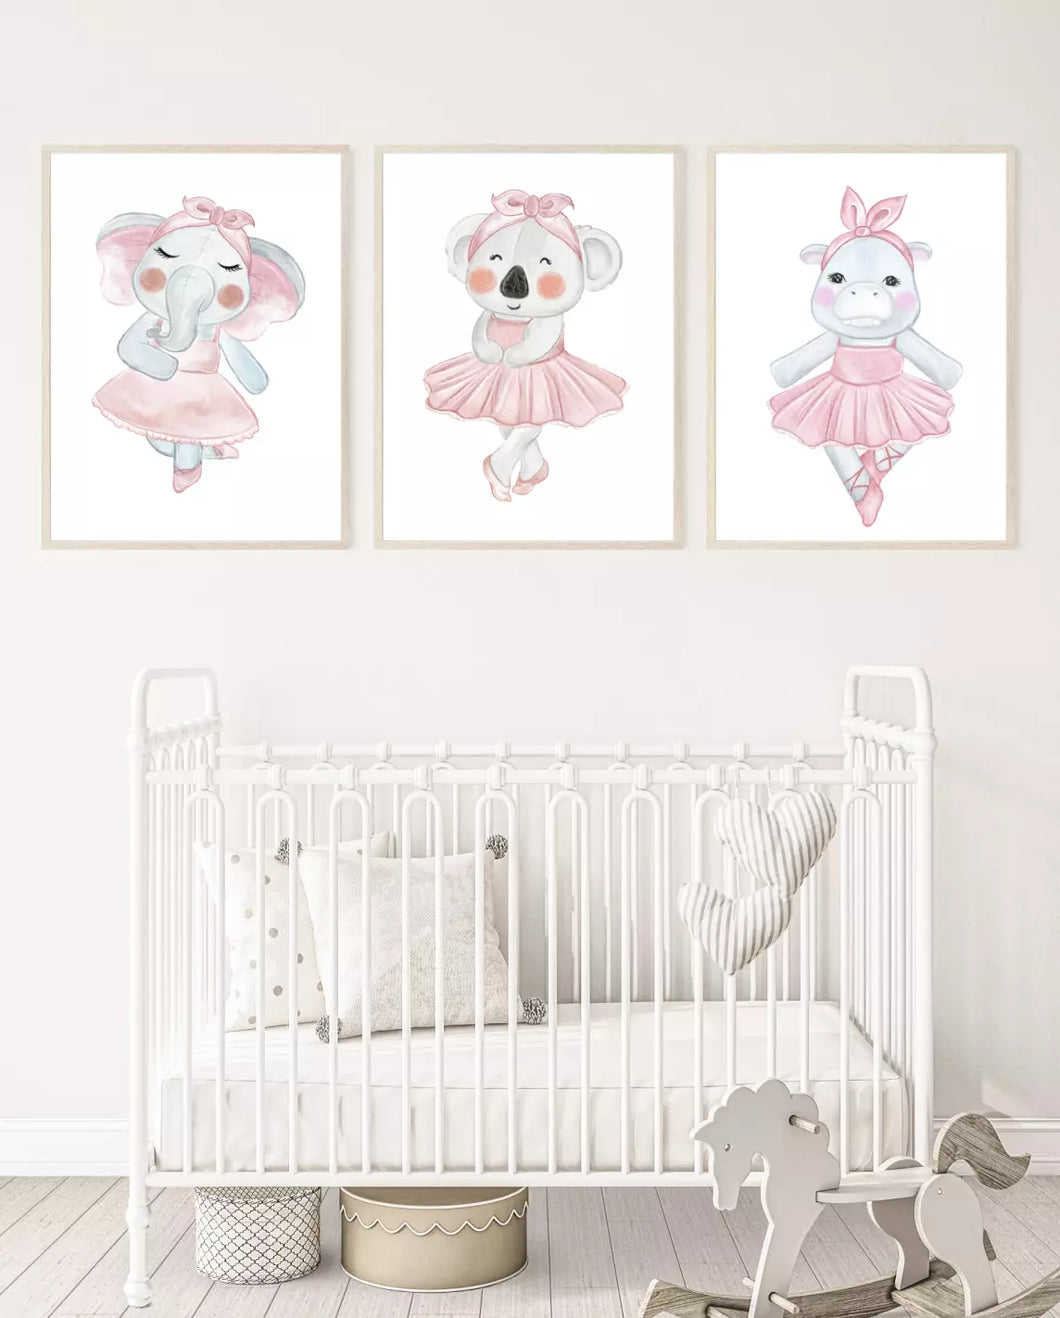 Set of 3 Cute Animals dressed as Ballerina's in Pink Tutus Wall Art Poster Prints, Various Sizes Available